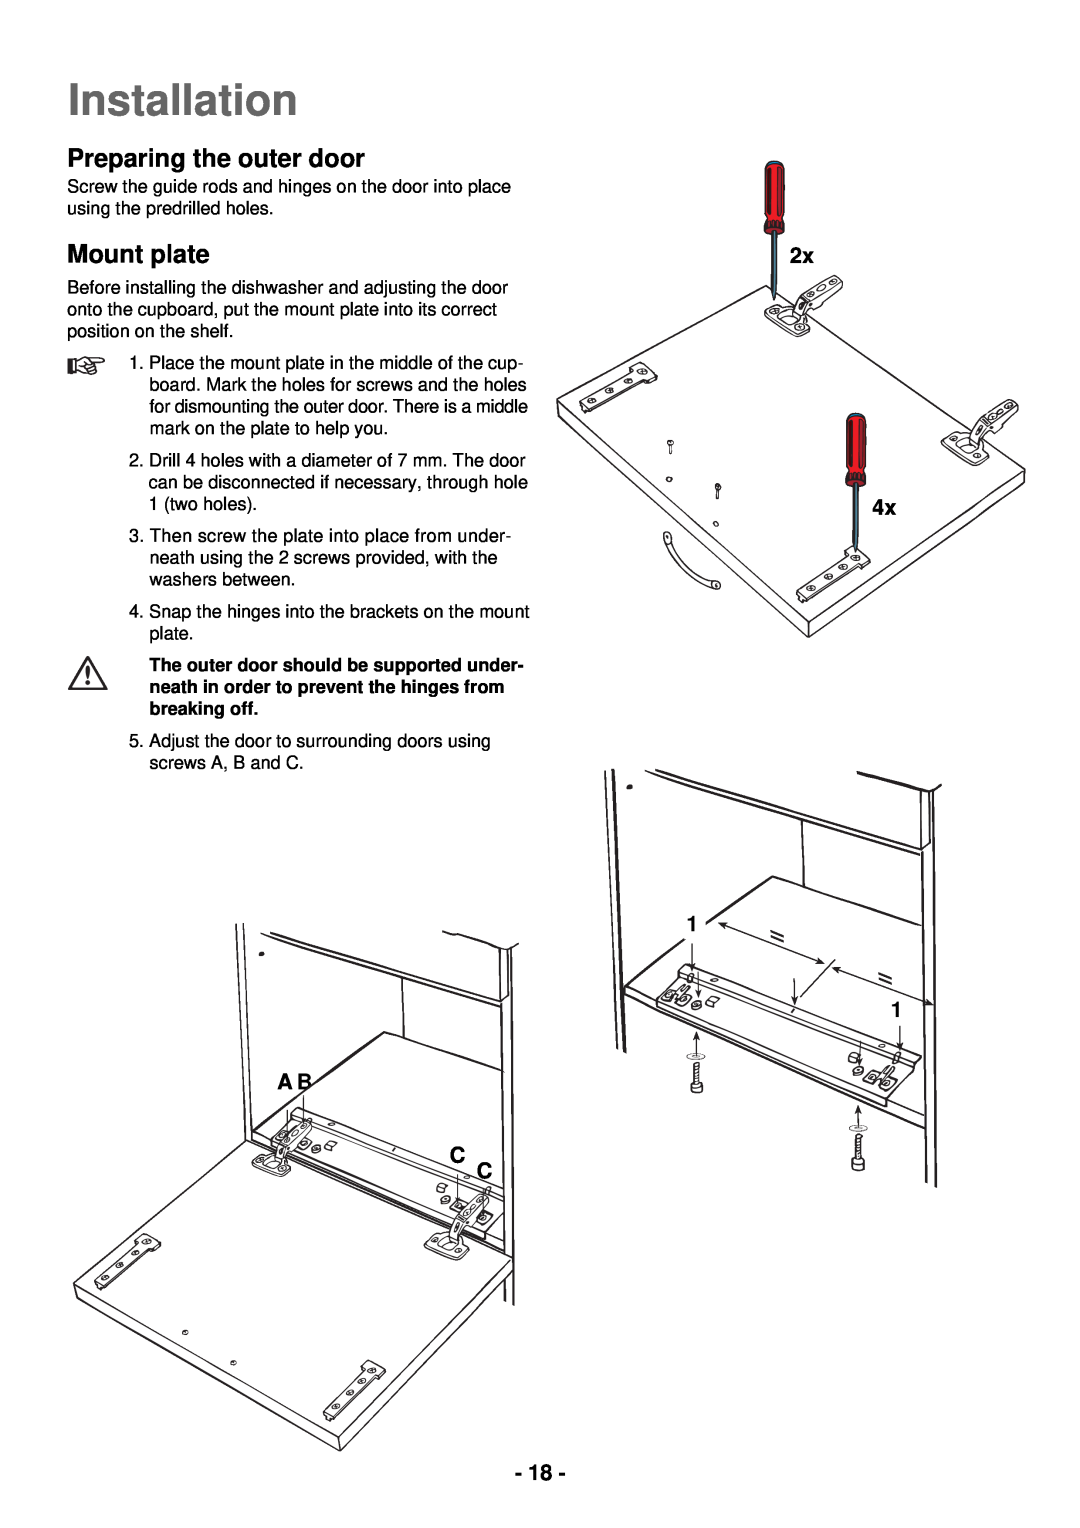 Electrolux ESL 2435 manual Preparing the outer door, Mount plate, 2x 4x, A B C, Installation 